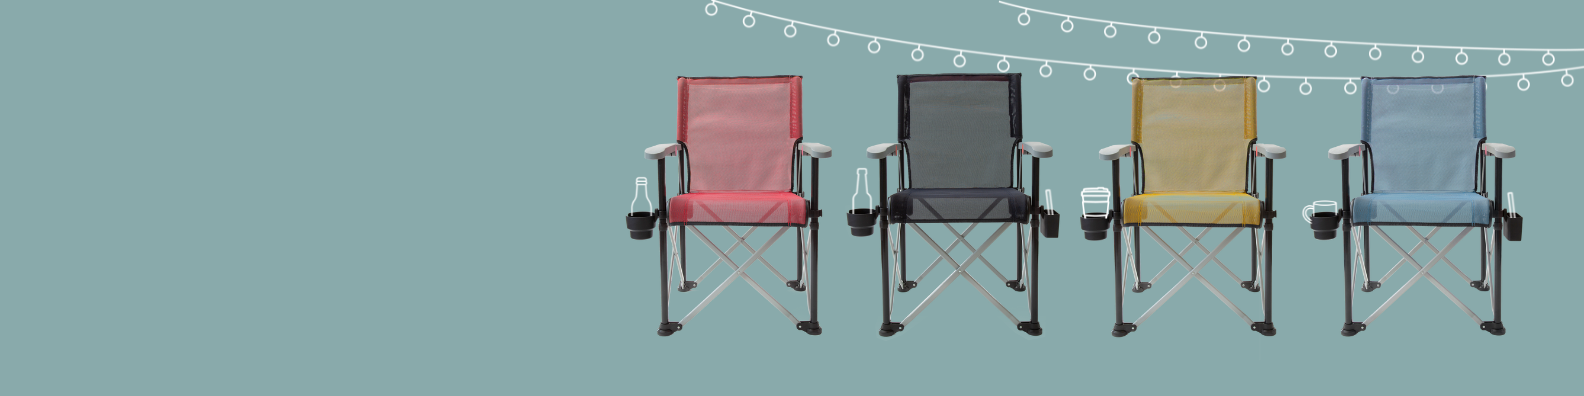 True Places Emmett Portable Chairs in different colors. The ultimate camp chair, see FAQ or contact us for more information.